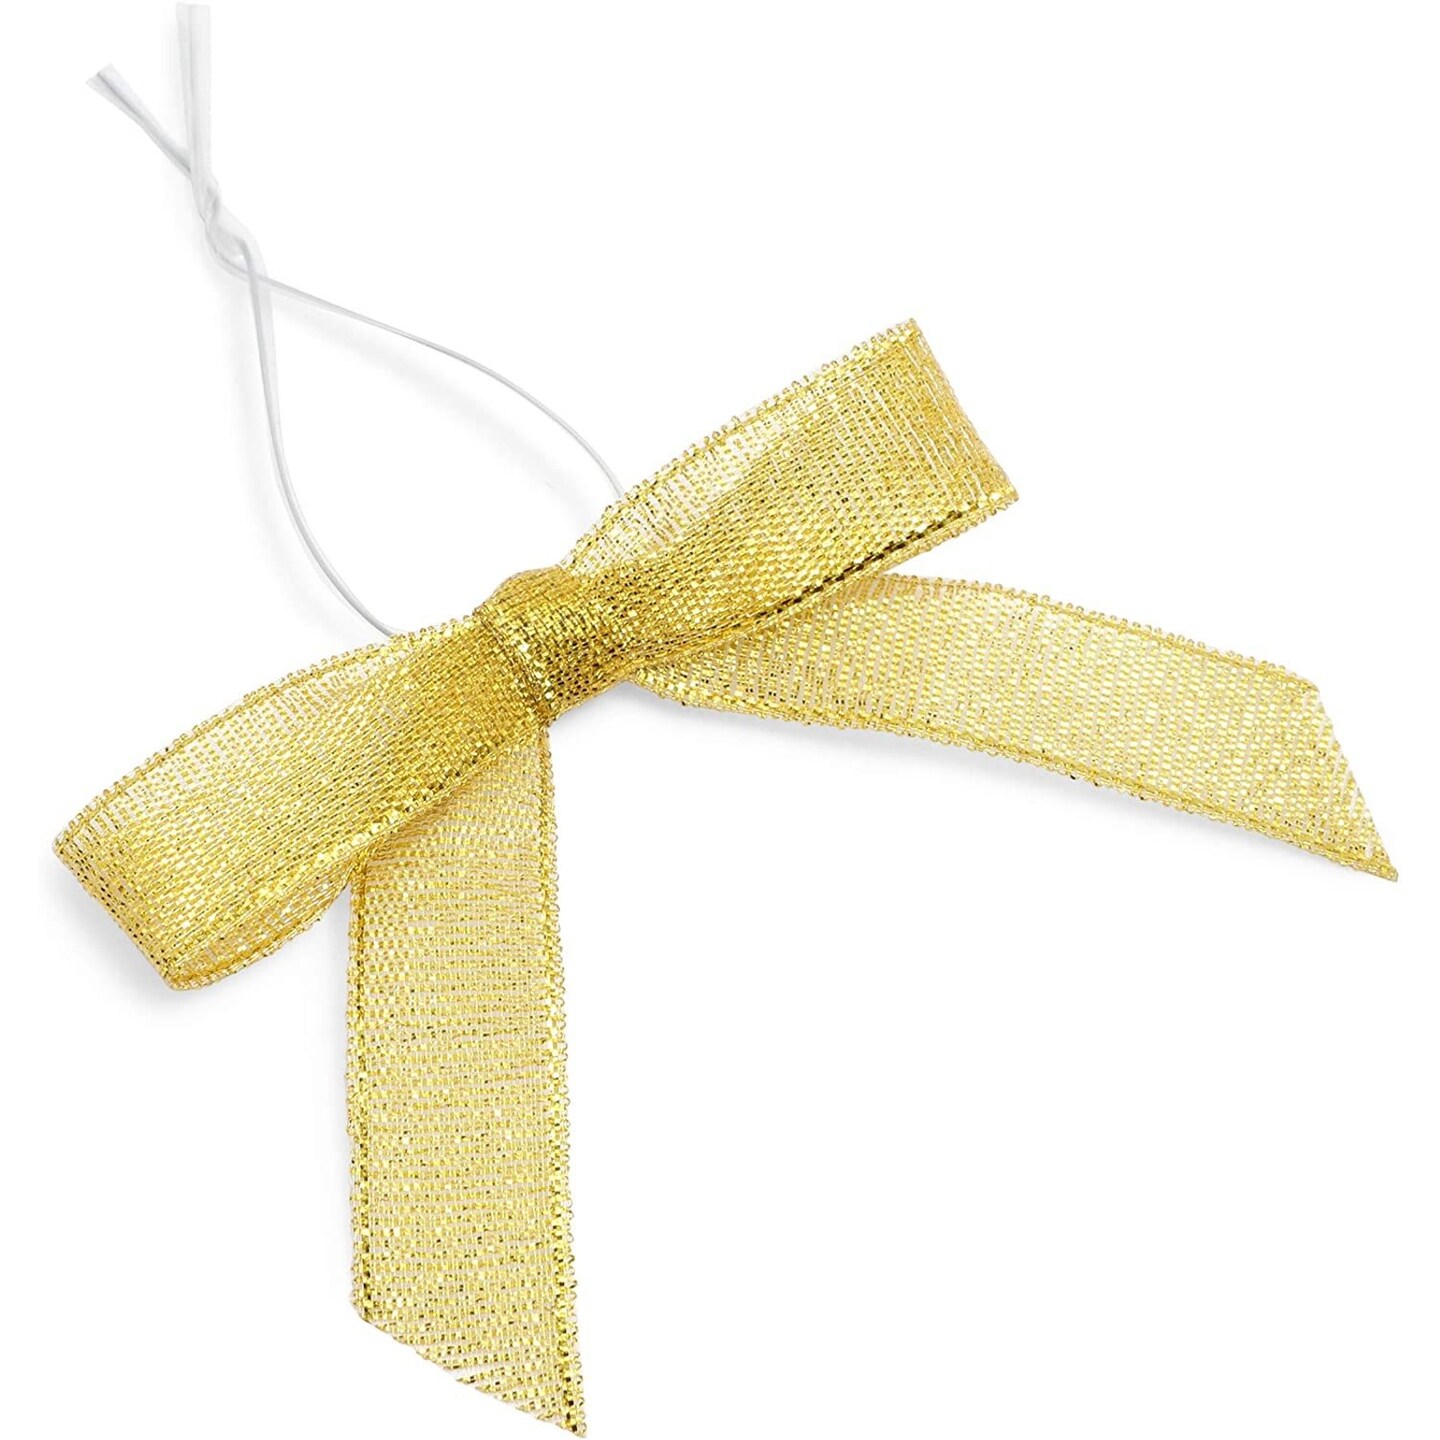 White Grosgrain Ribbon for Crafts and Bows, 7/8 x 100 Yards by Gwen Studios